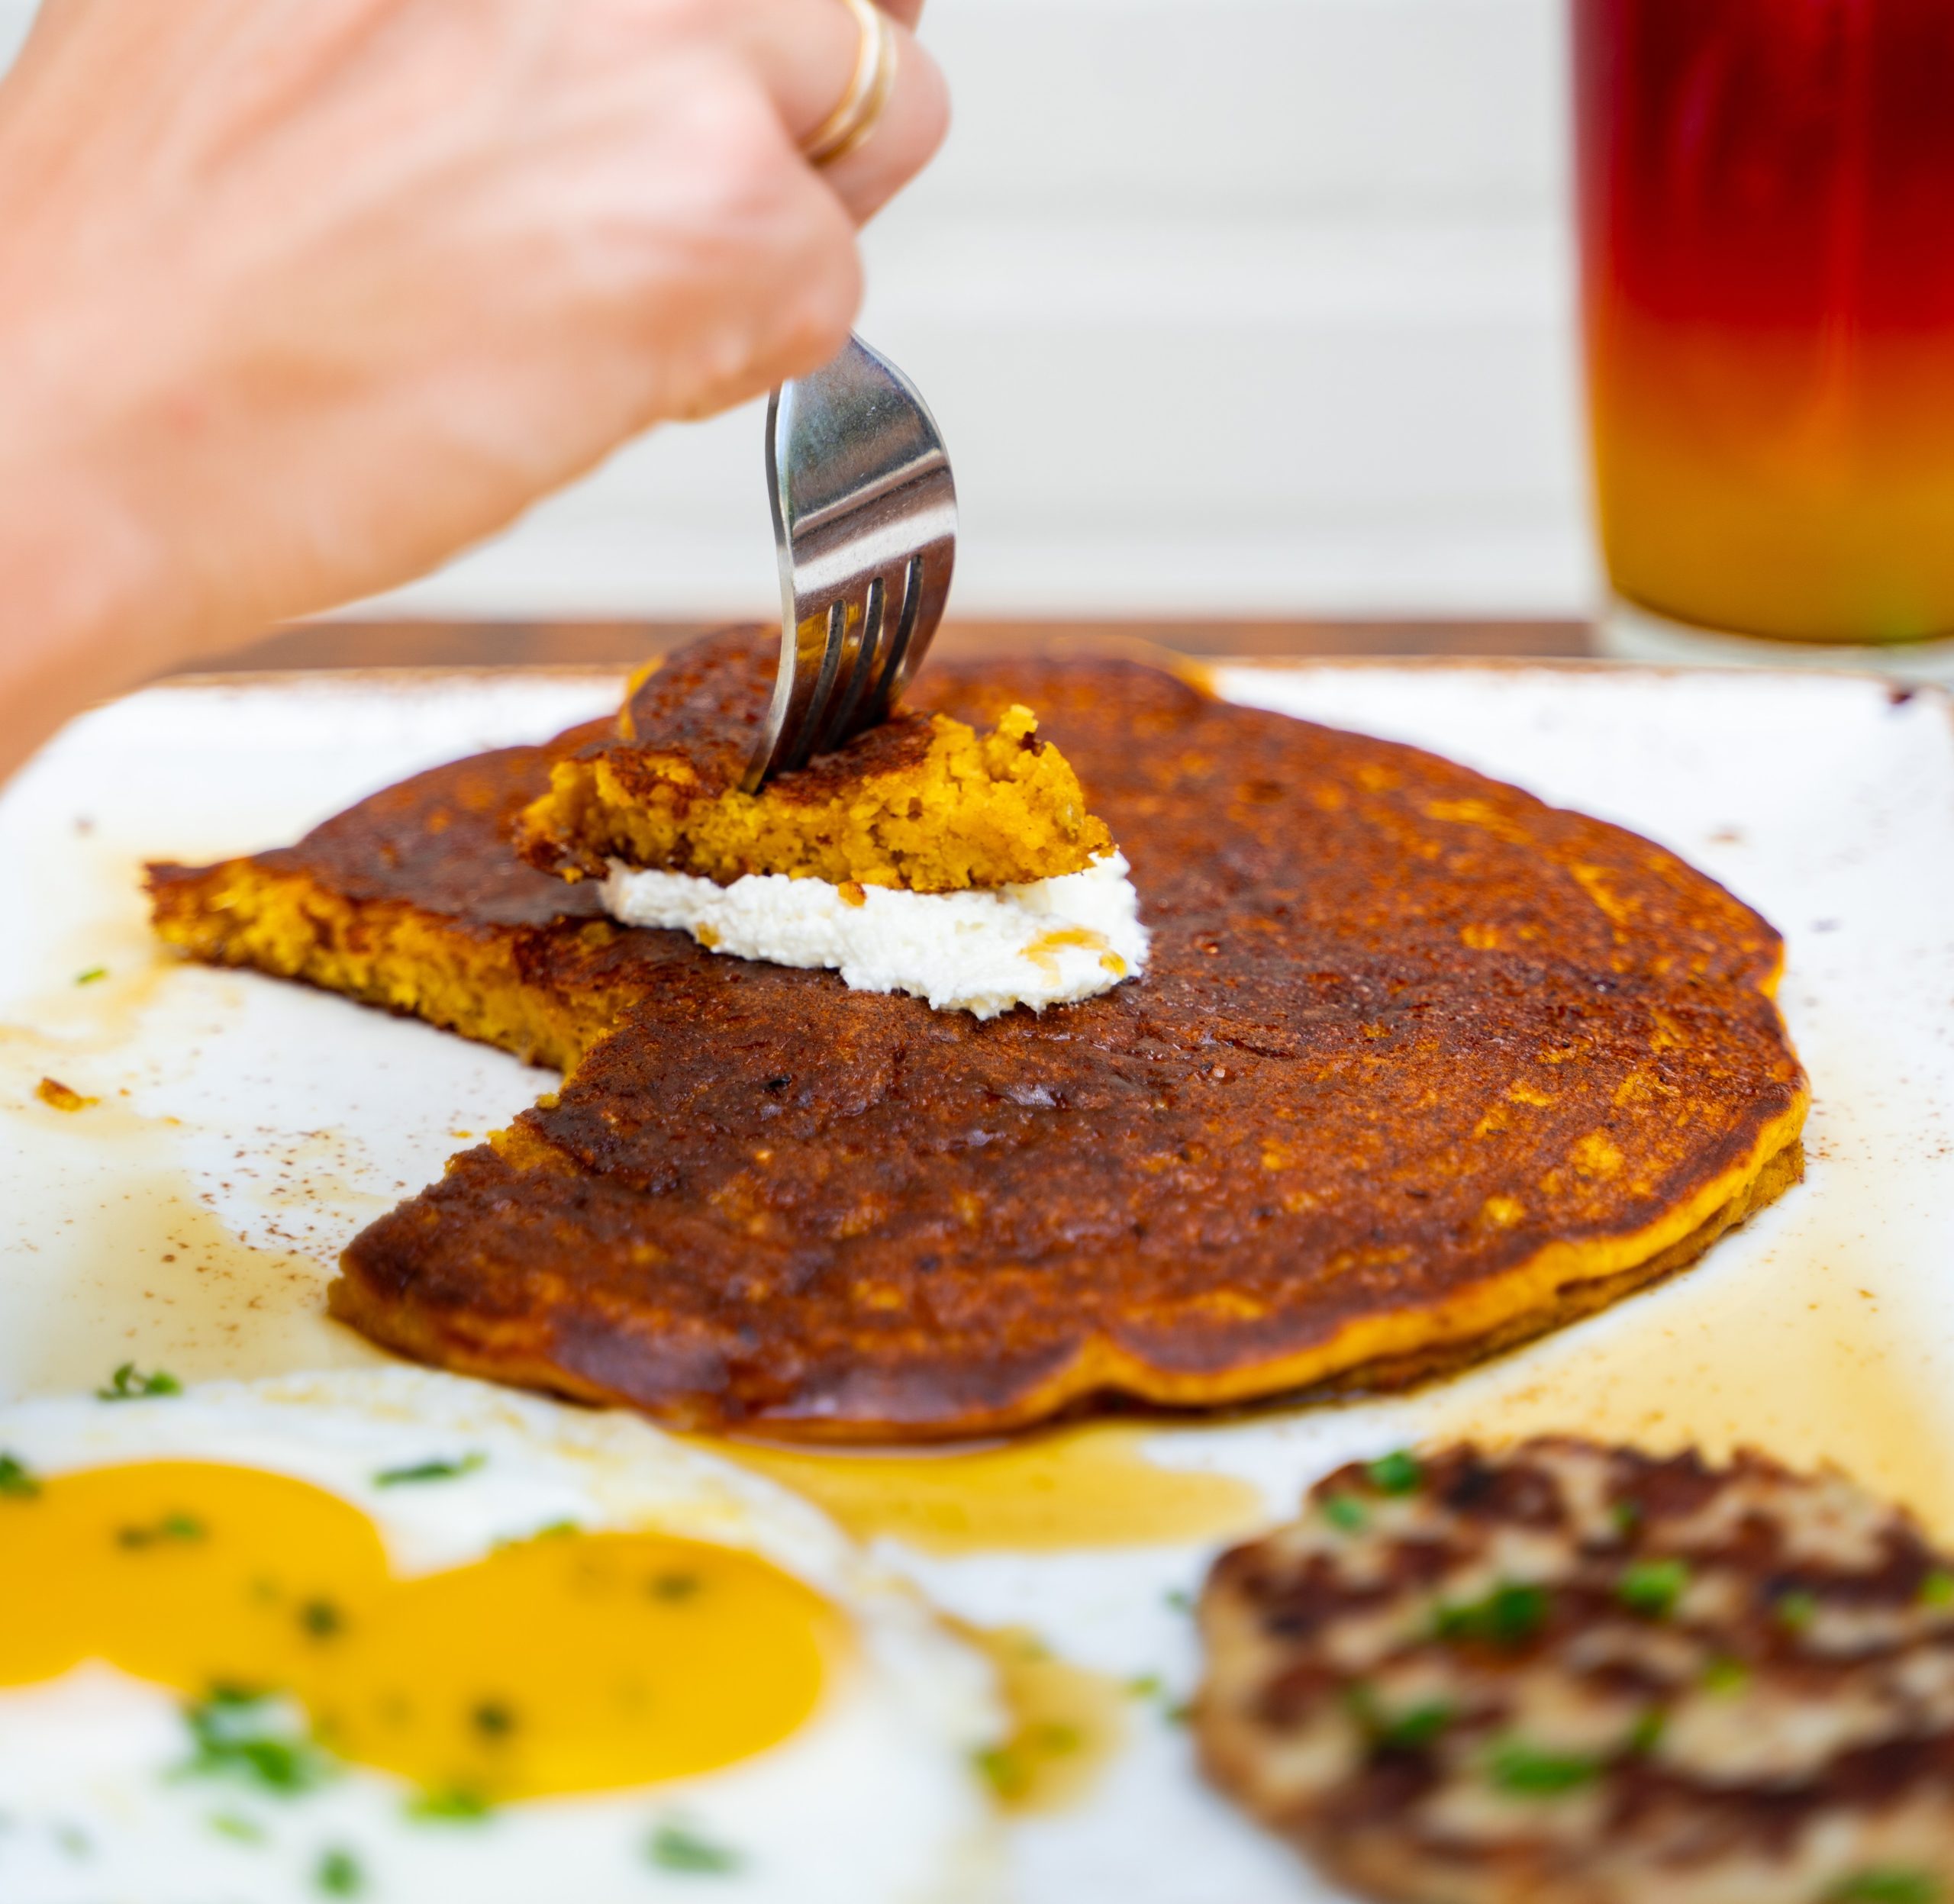 A plate with a pumpkin pancake, fried eggs and sausage patty.